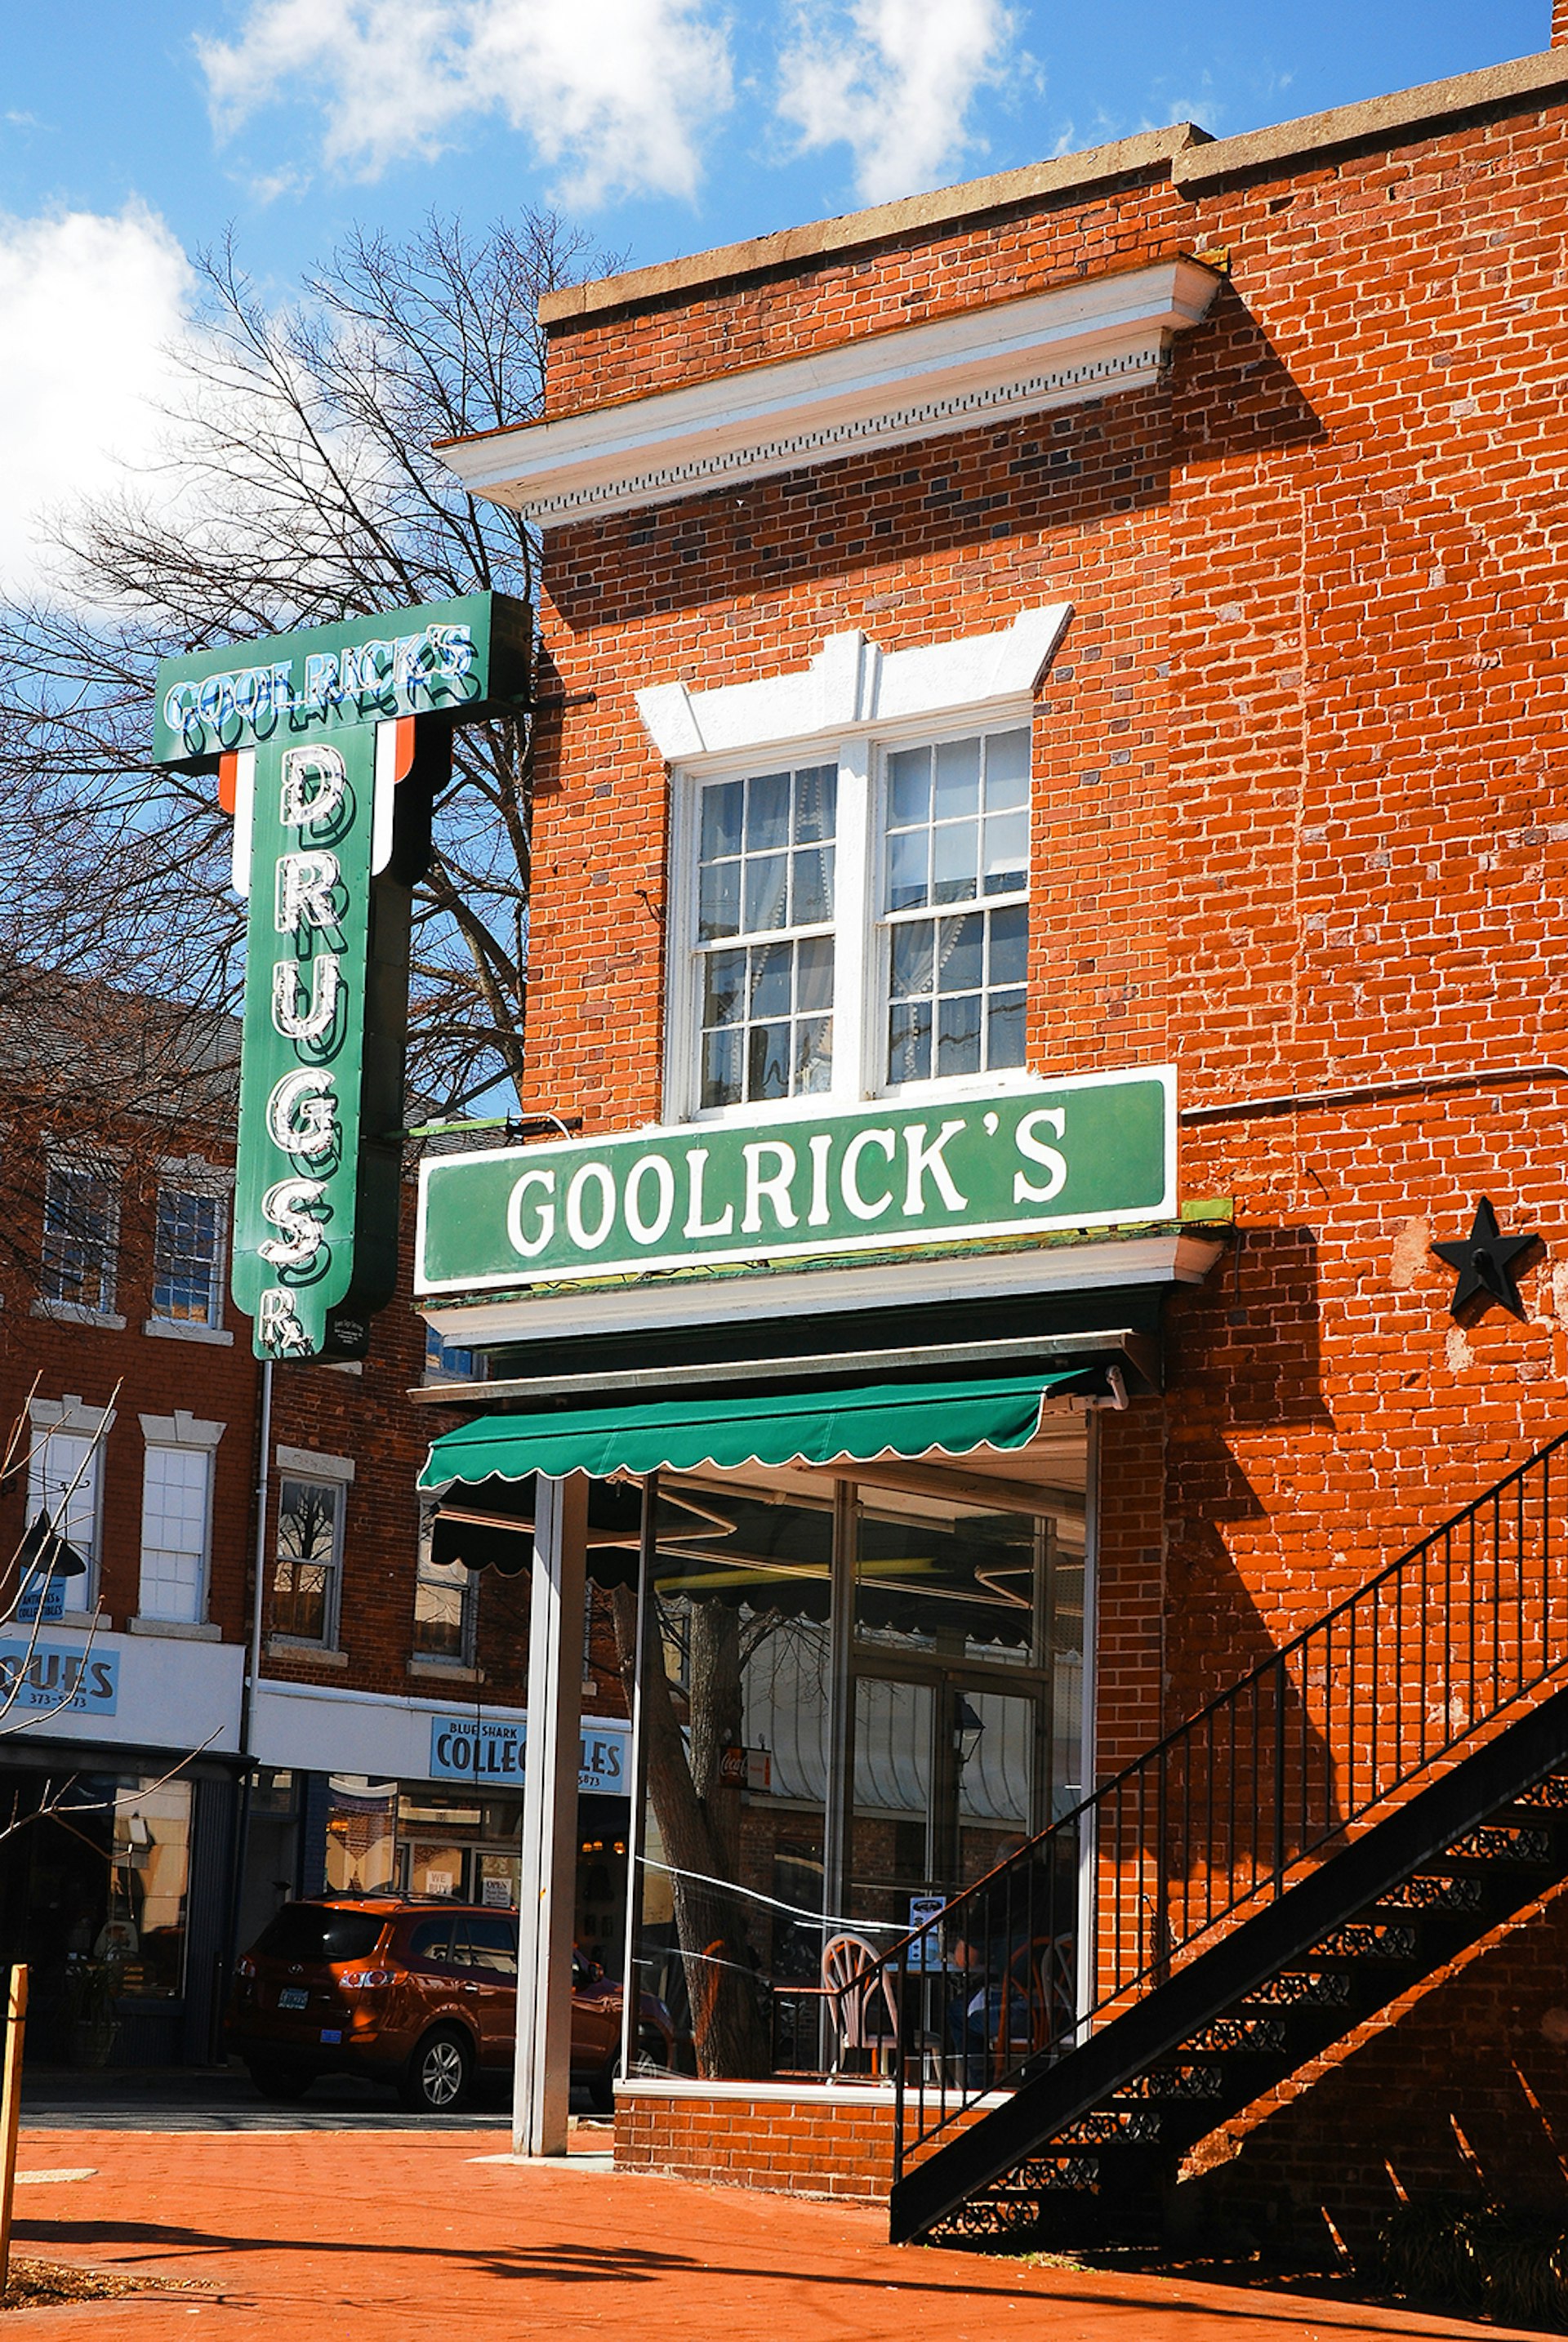 red brick facade and green neon sign reading 'Goolrick's Pharmacy'